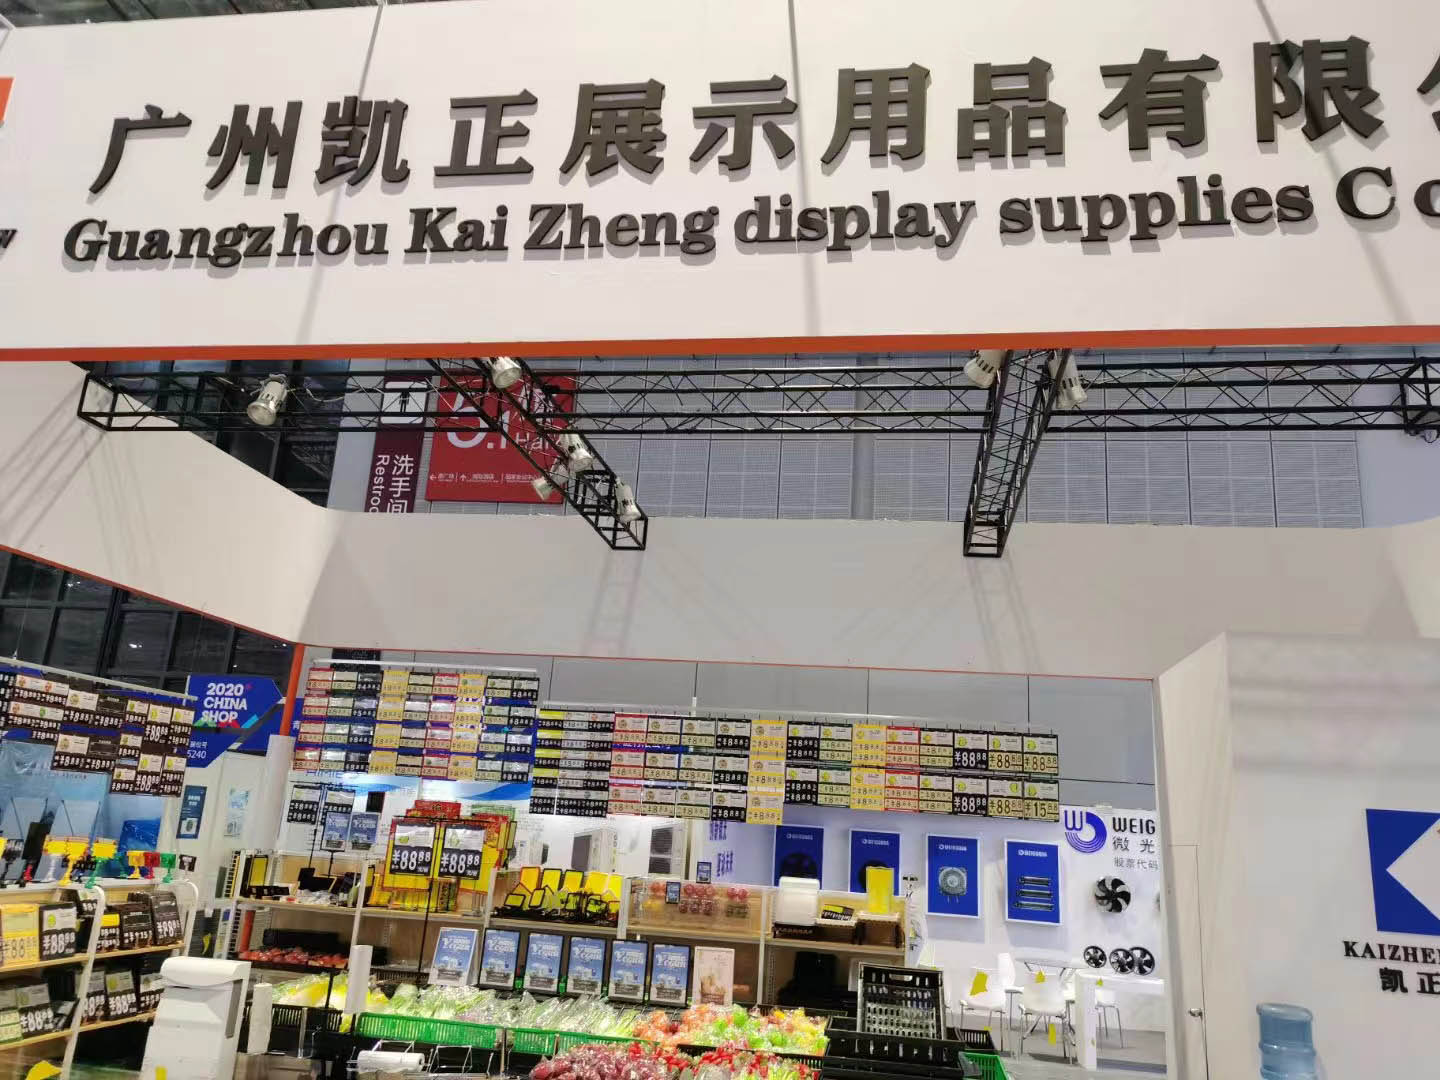 Guangzhou Kaizheng Display Products Co., Ltd. appeared at the Shanghai Retail Industry Exhibition